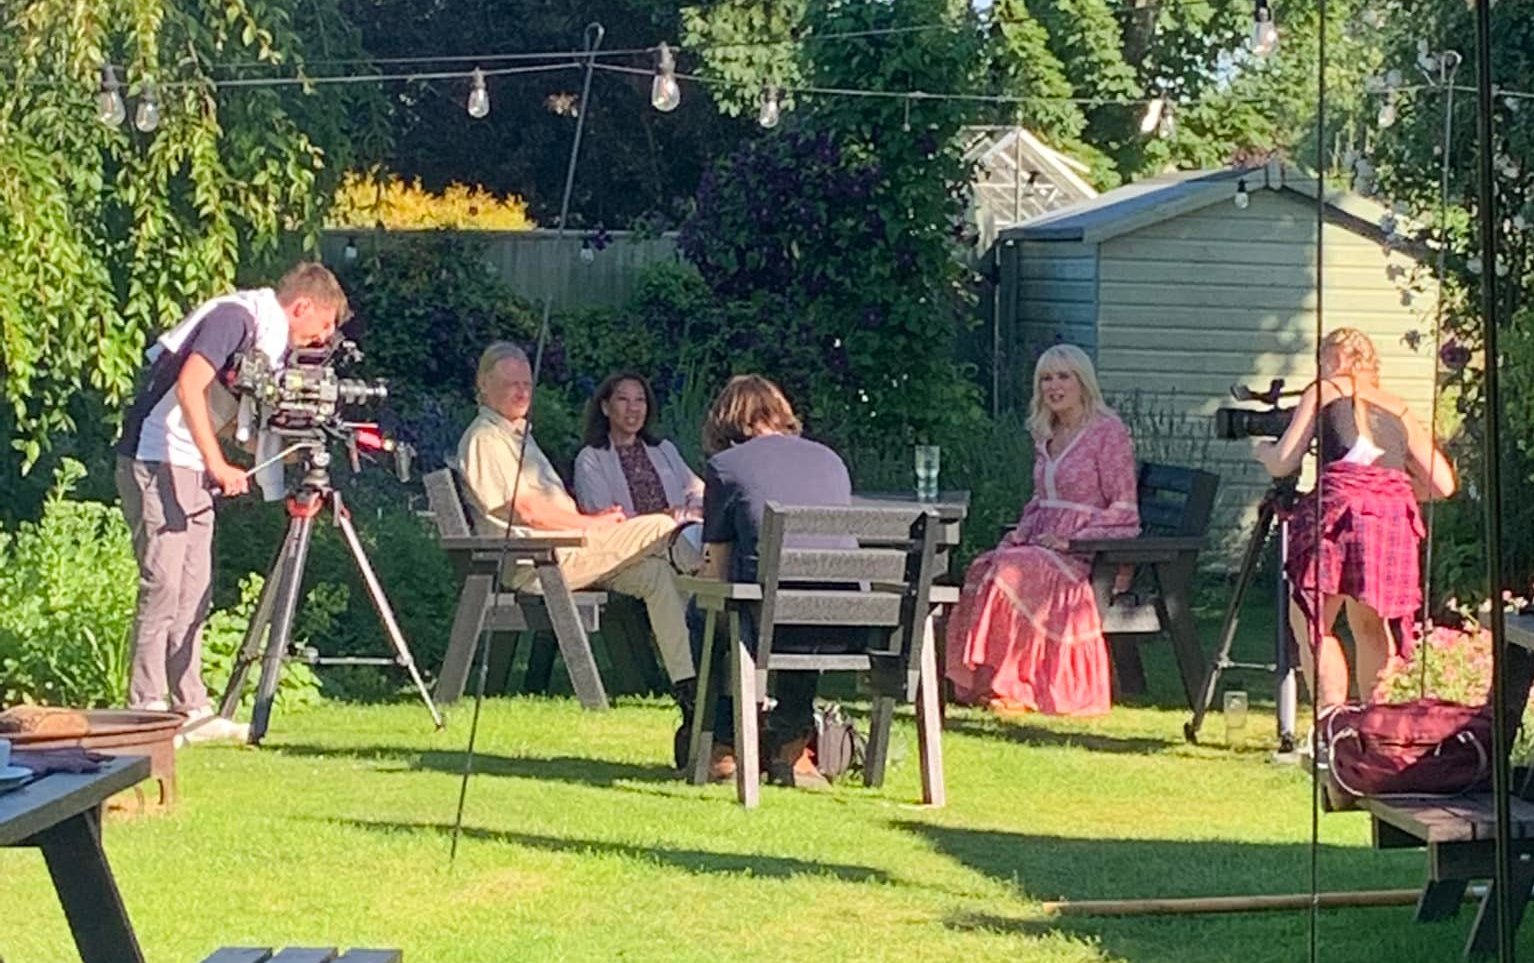 Nikki Chapman has been filming for BBC Ones Escape to the Country at the Three Horseshoes Inn in Little Cowarne, near Bromyard